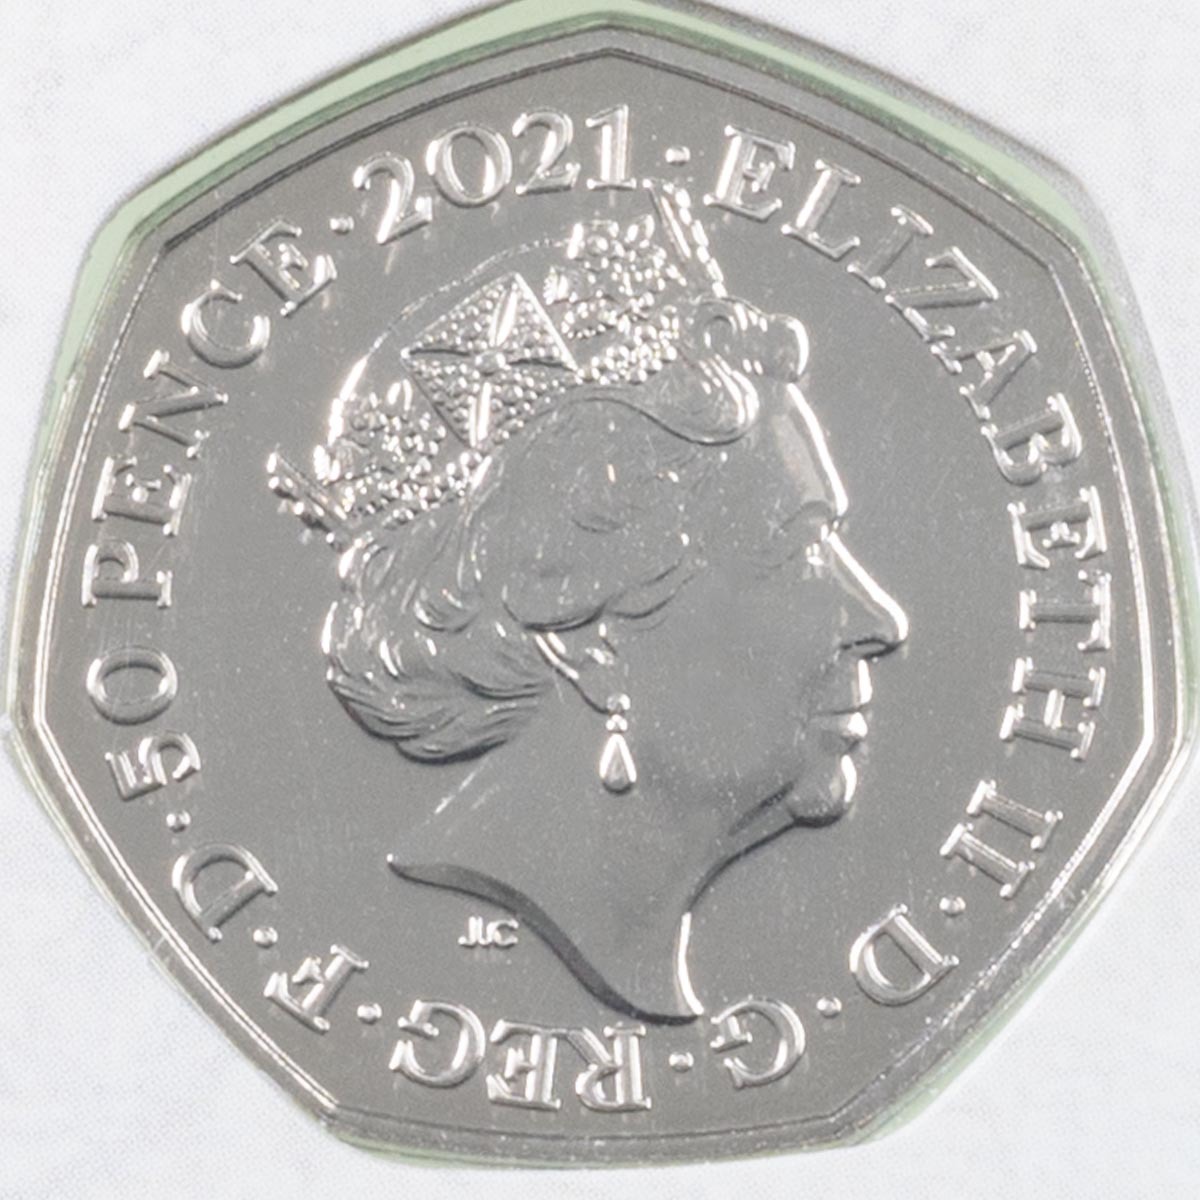 uk21smbc-2021-coloured-the-snowman-fifty-pence-brilliant-uncirculated-coin-in-folder-002-m